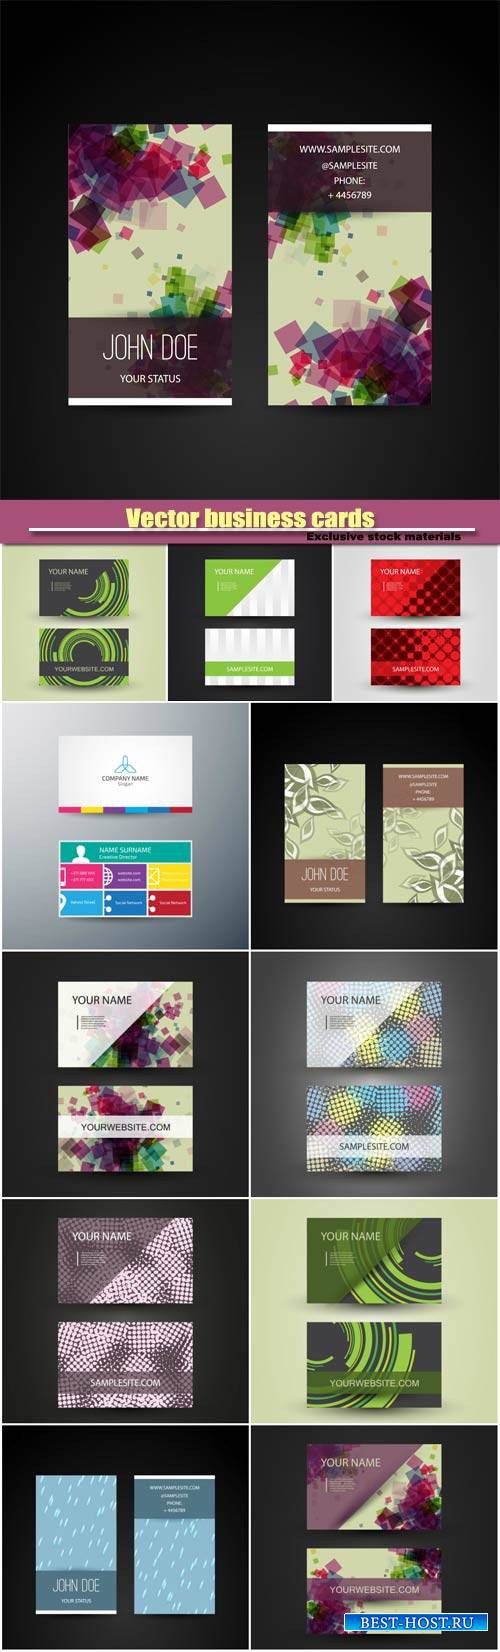 Vector business cards with abstract patterns